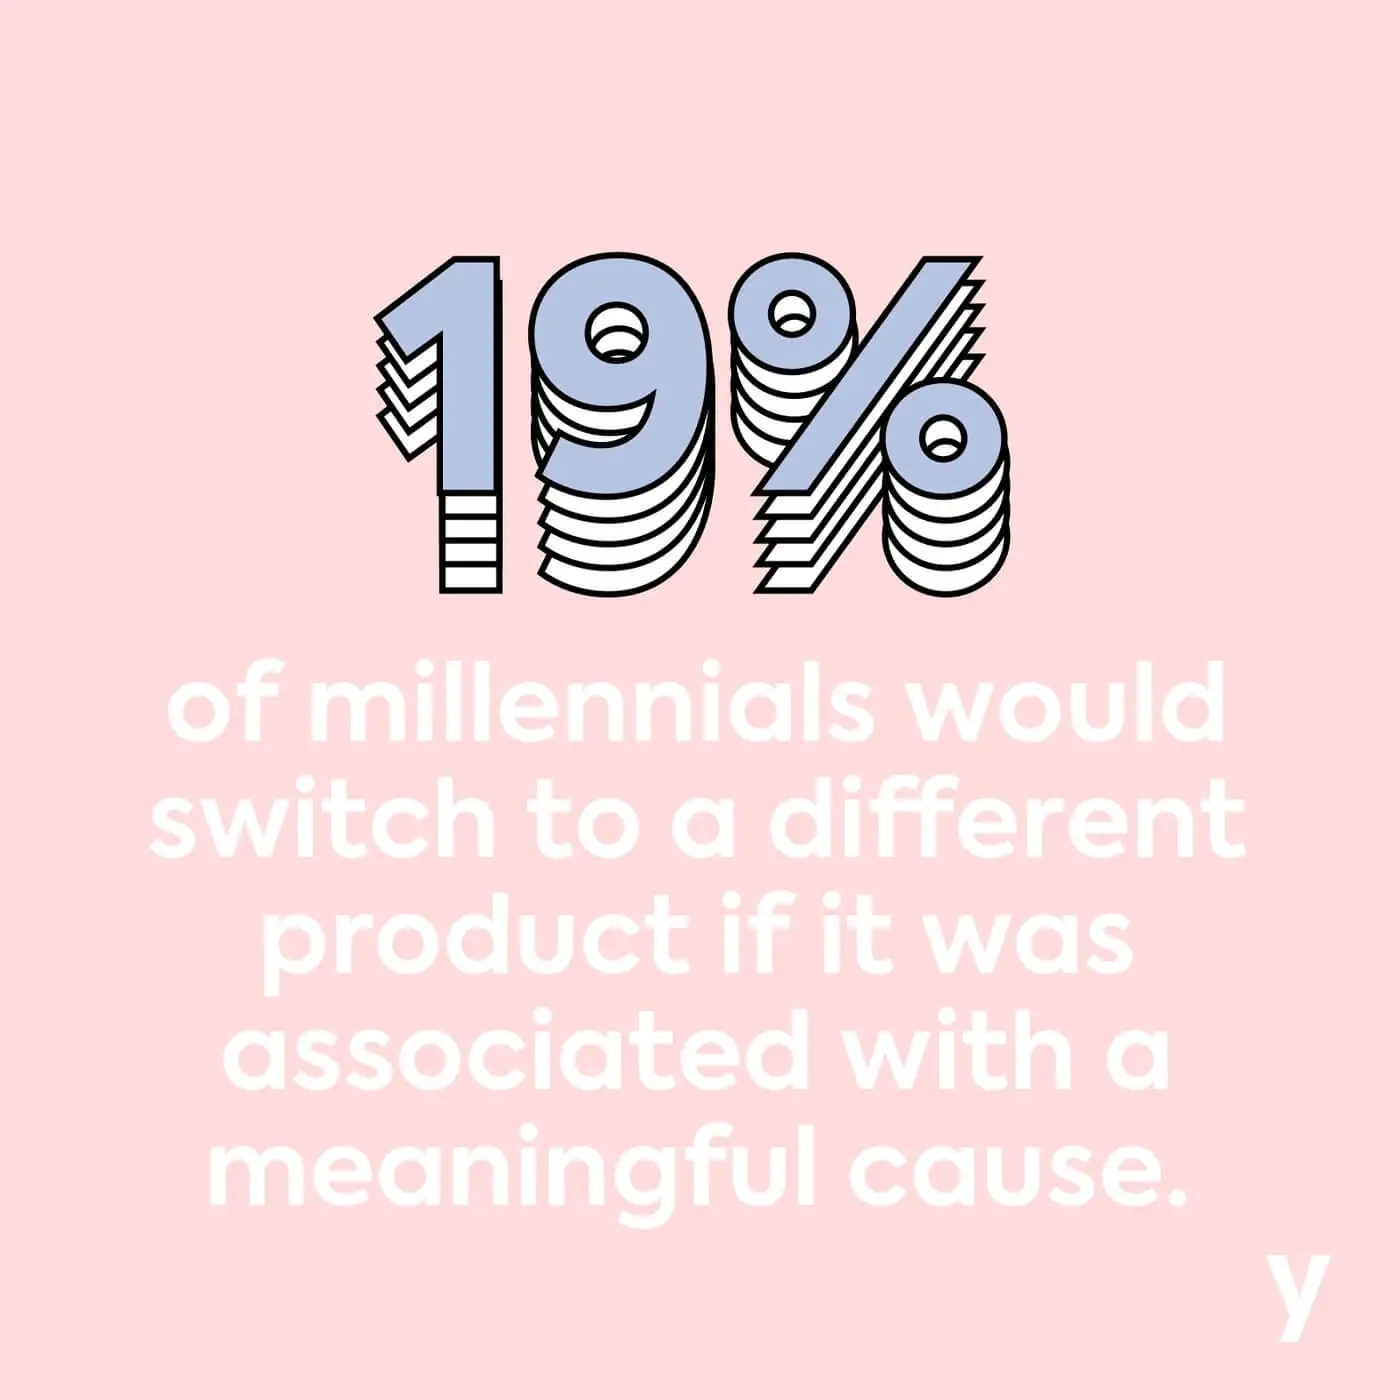 9 % of millennials would switch to a different product if associated with a meaningful cause.